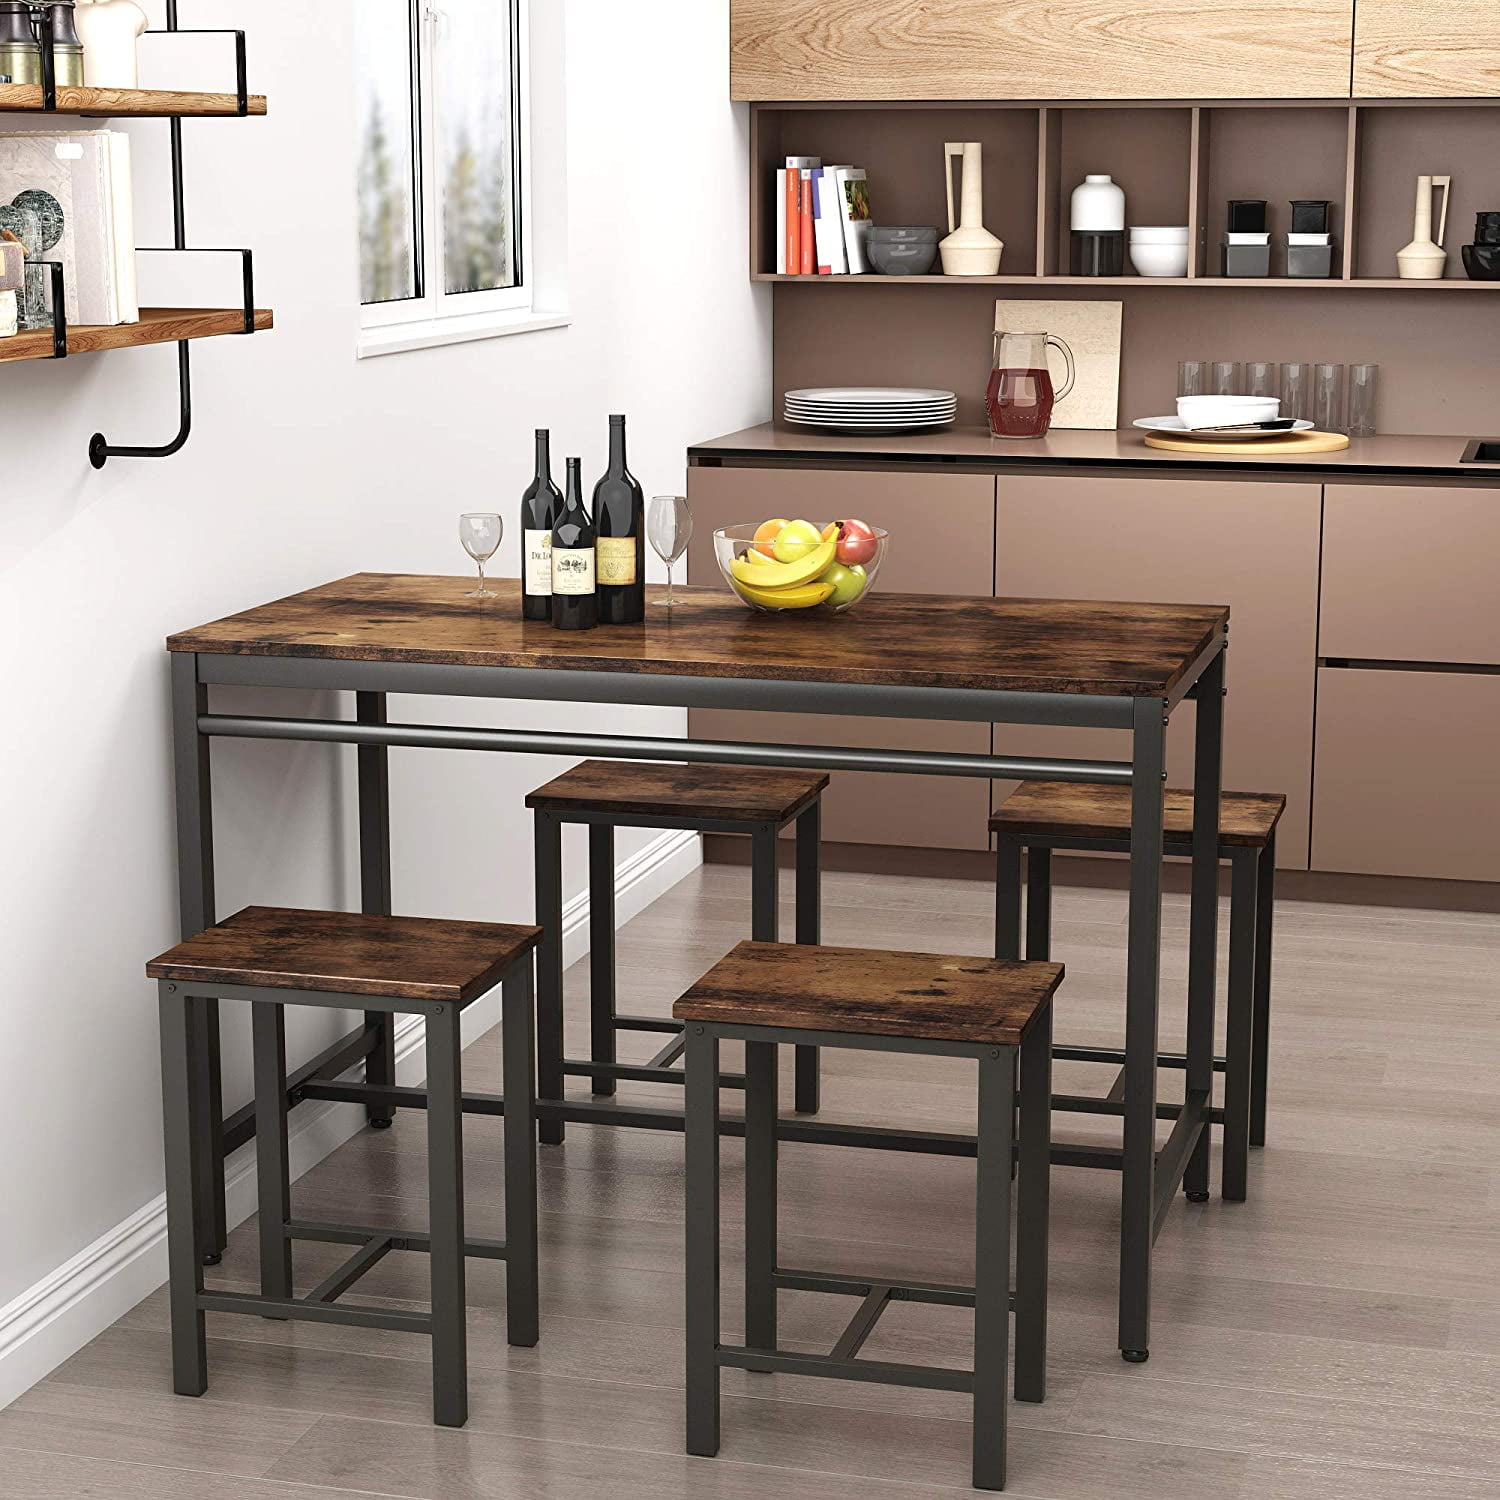 4HOMART 3 Pieces Bar Sets Small Space Bar Counter Table and 2 Barstools Sets Breakfast Accent High Dining Room Sets with Wood Table Top and Black Metal Legs for Apartment Pub Home Furniture 